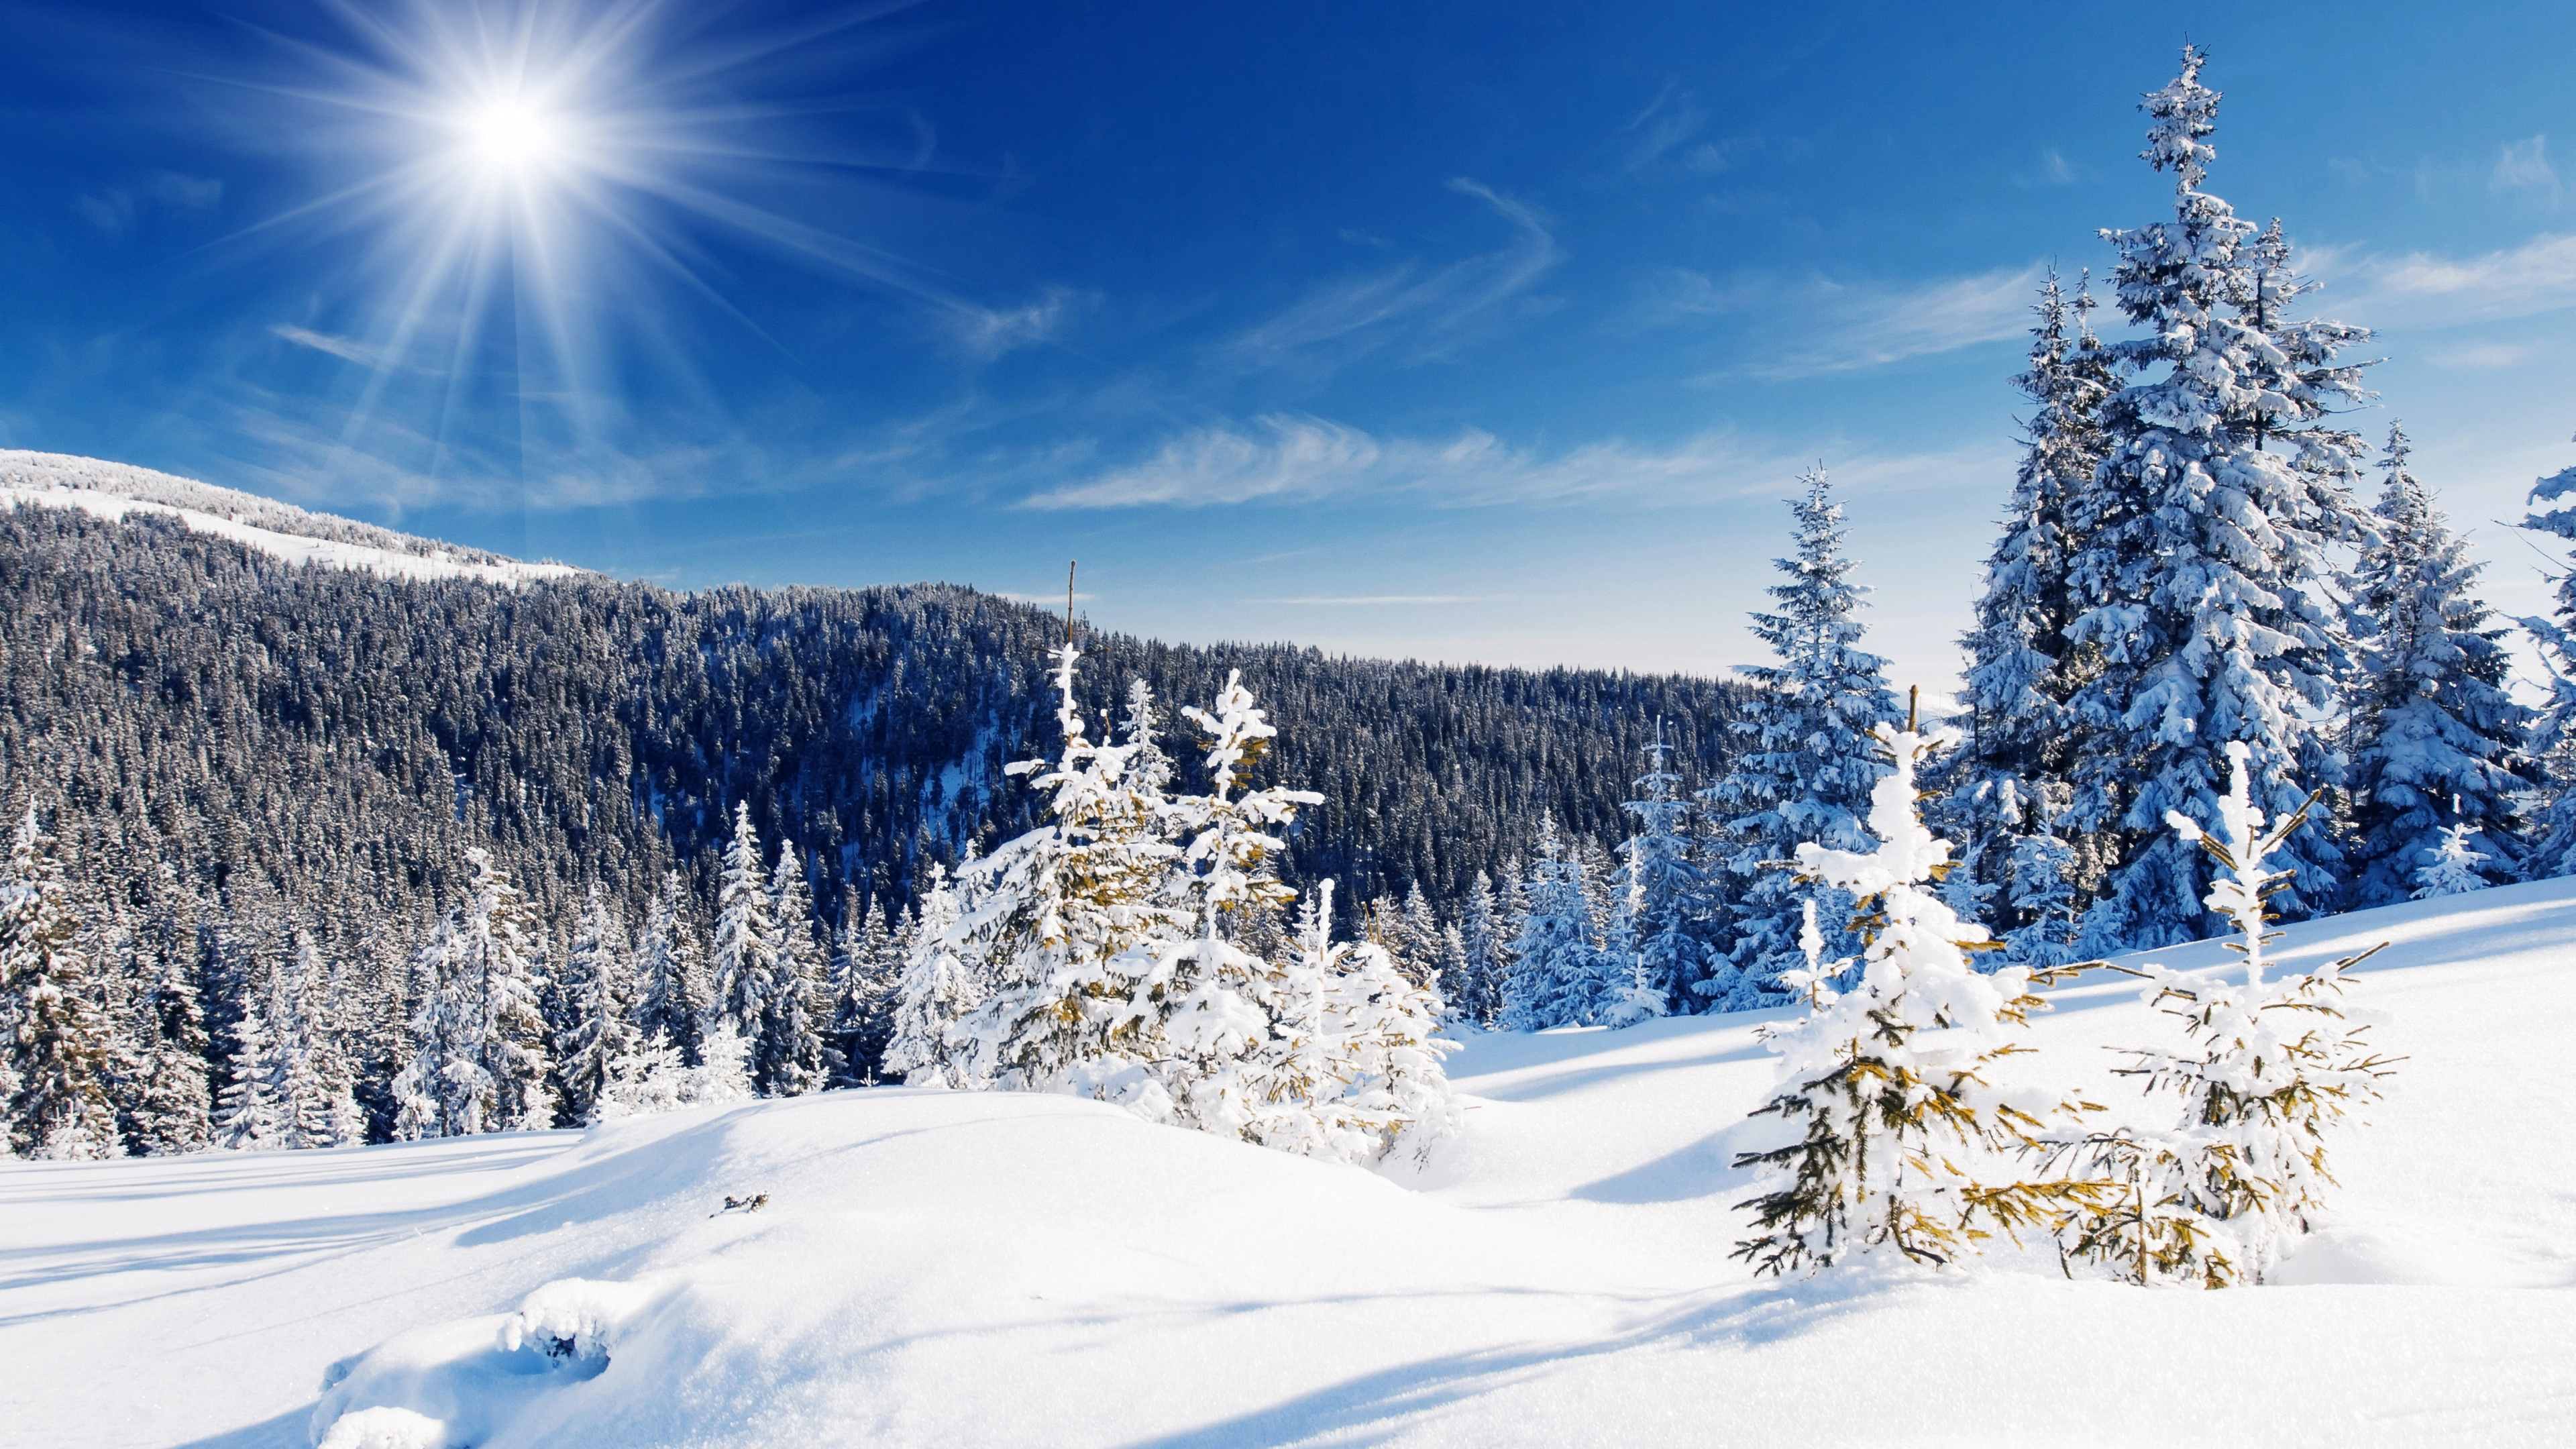 Snow Covered Trees Under Blue Sky During Daytime. Wallpaper in 3840x2160 Resolution